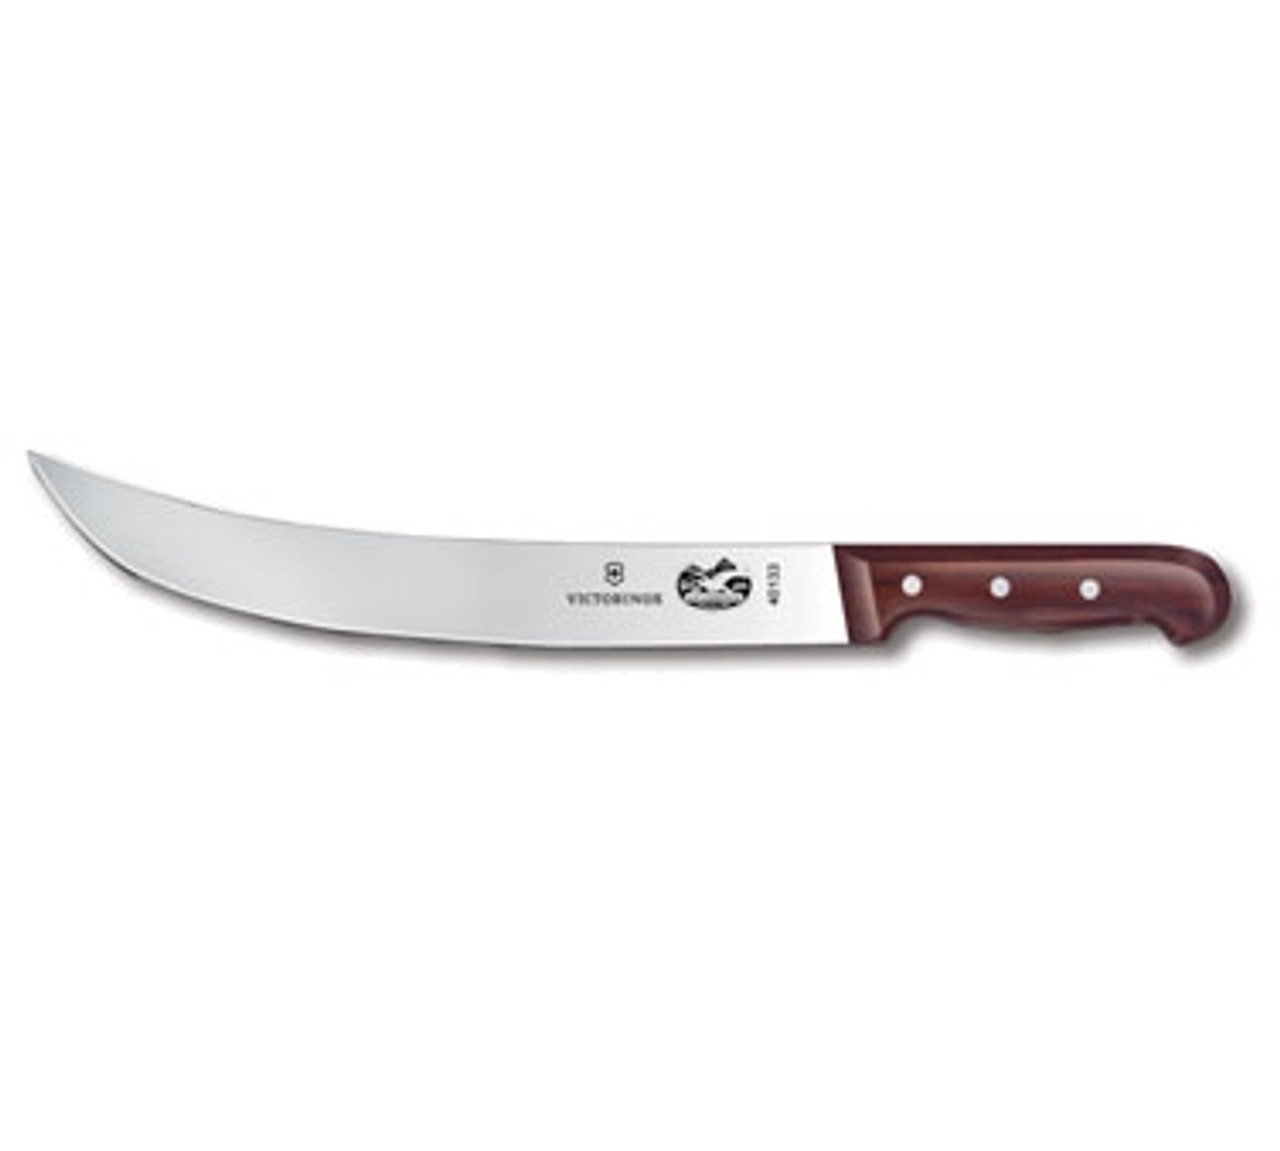 Victorinox 5.7300.31 12" Cimeter Knife with Rosewood Handle